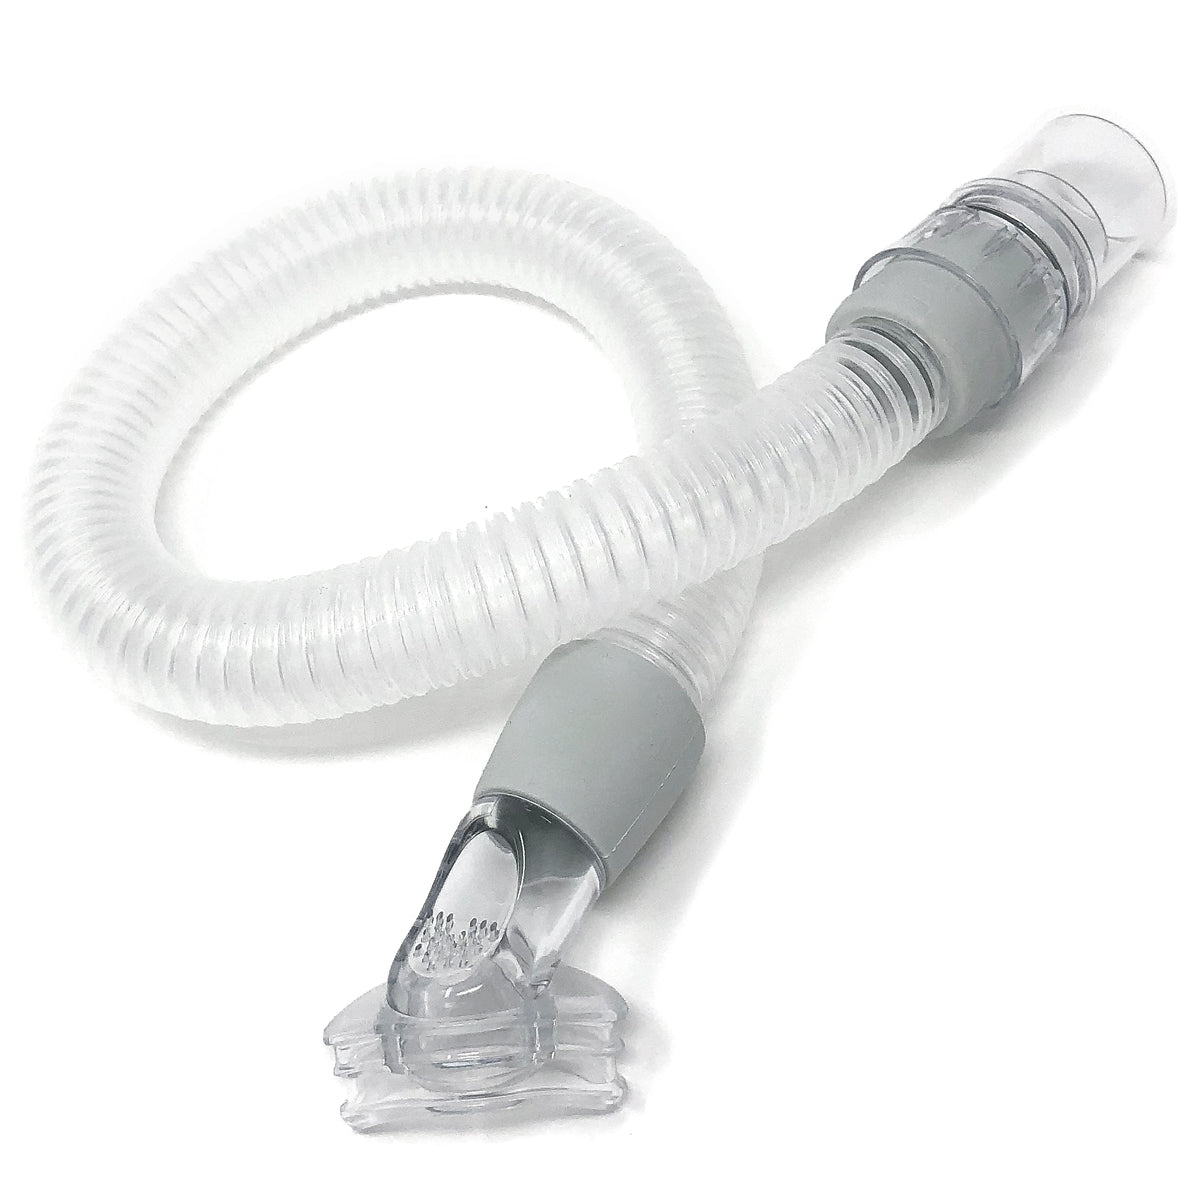 Short Swivel Tube (with Exhalation Port) for Nuance & Nuance Pro CPAP/BiPAP Masks